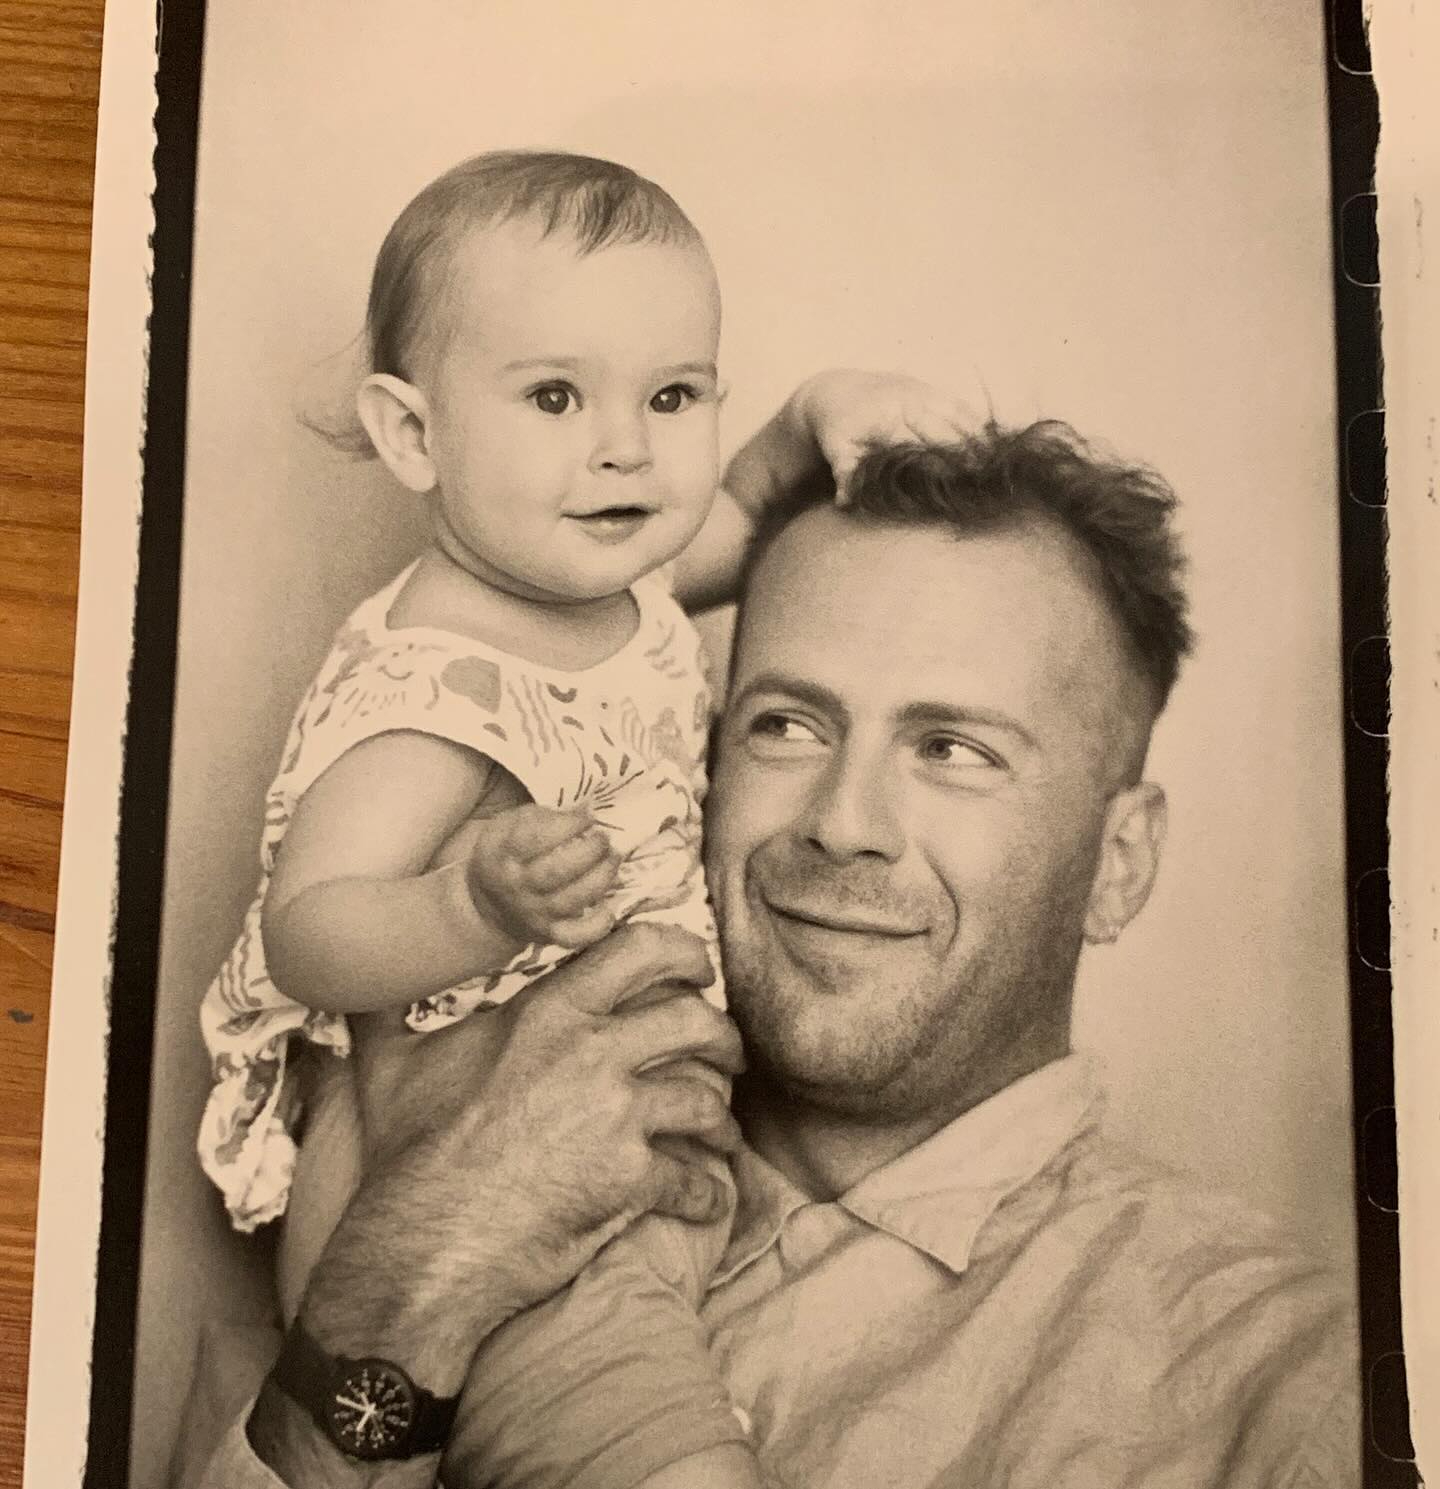 The post featured numerous throwback photos of Rumer as a child with her movie star father and several more recent photos of the father-daughter pair